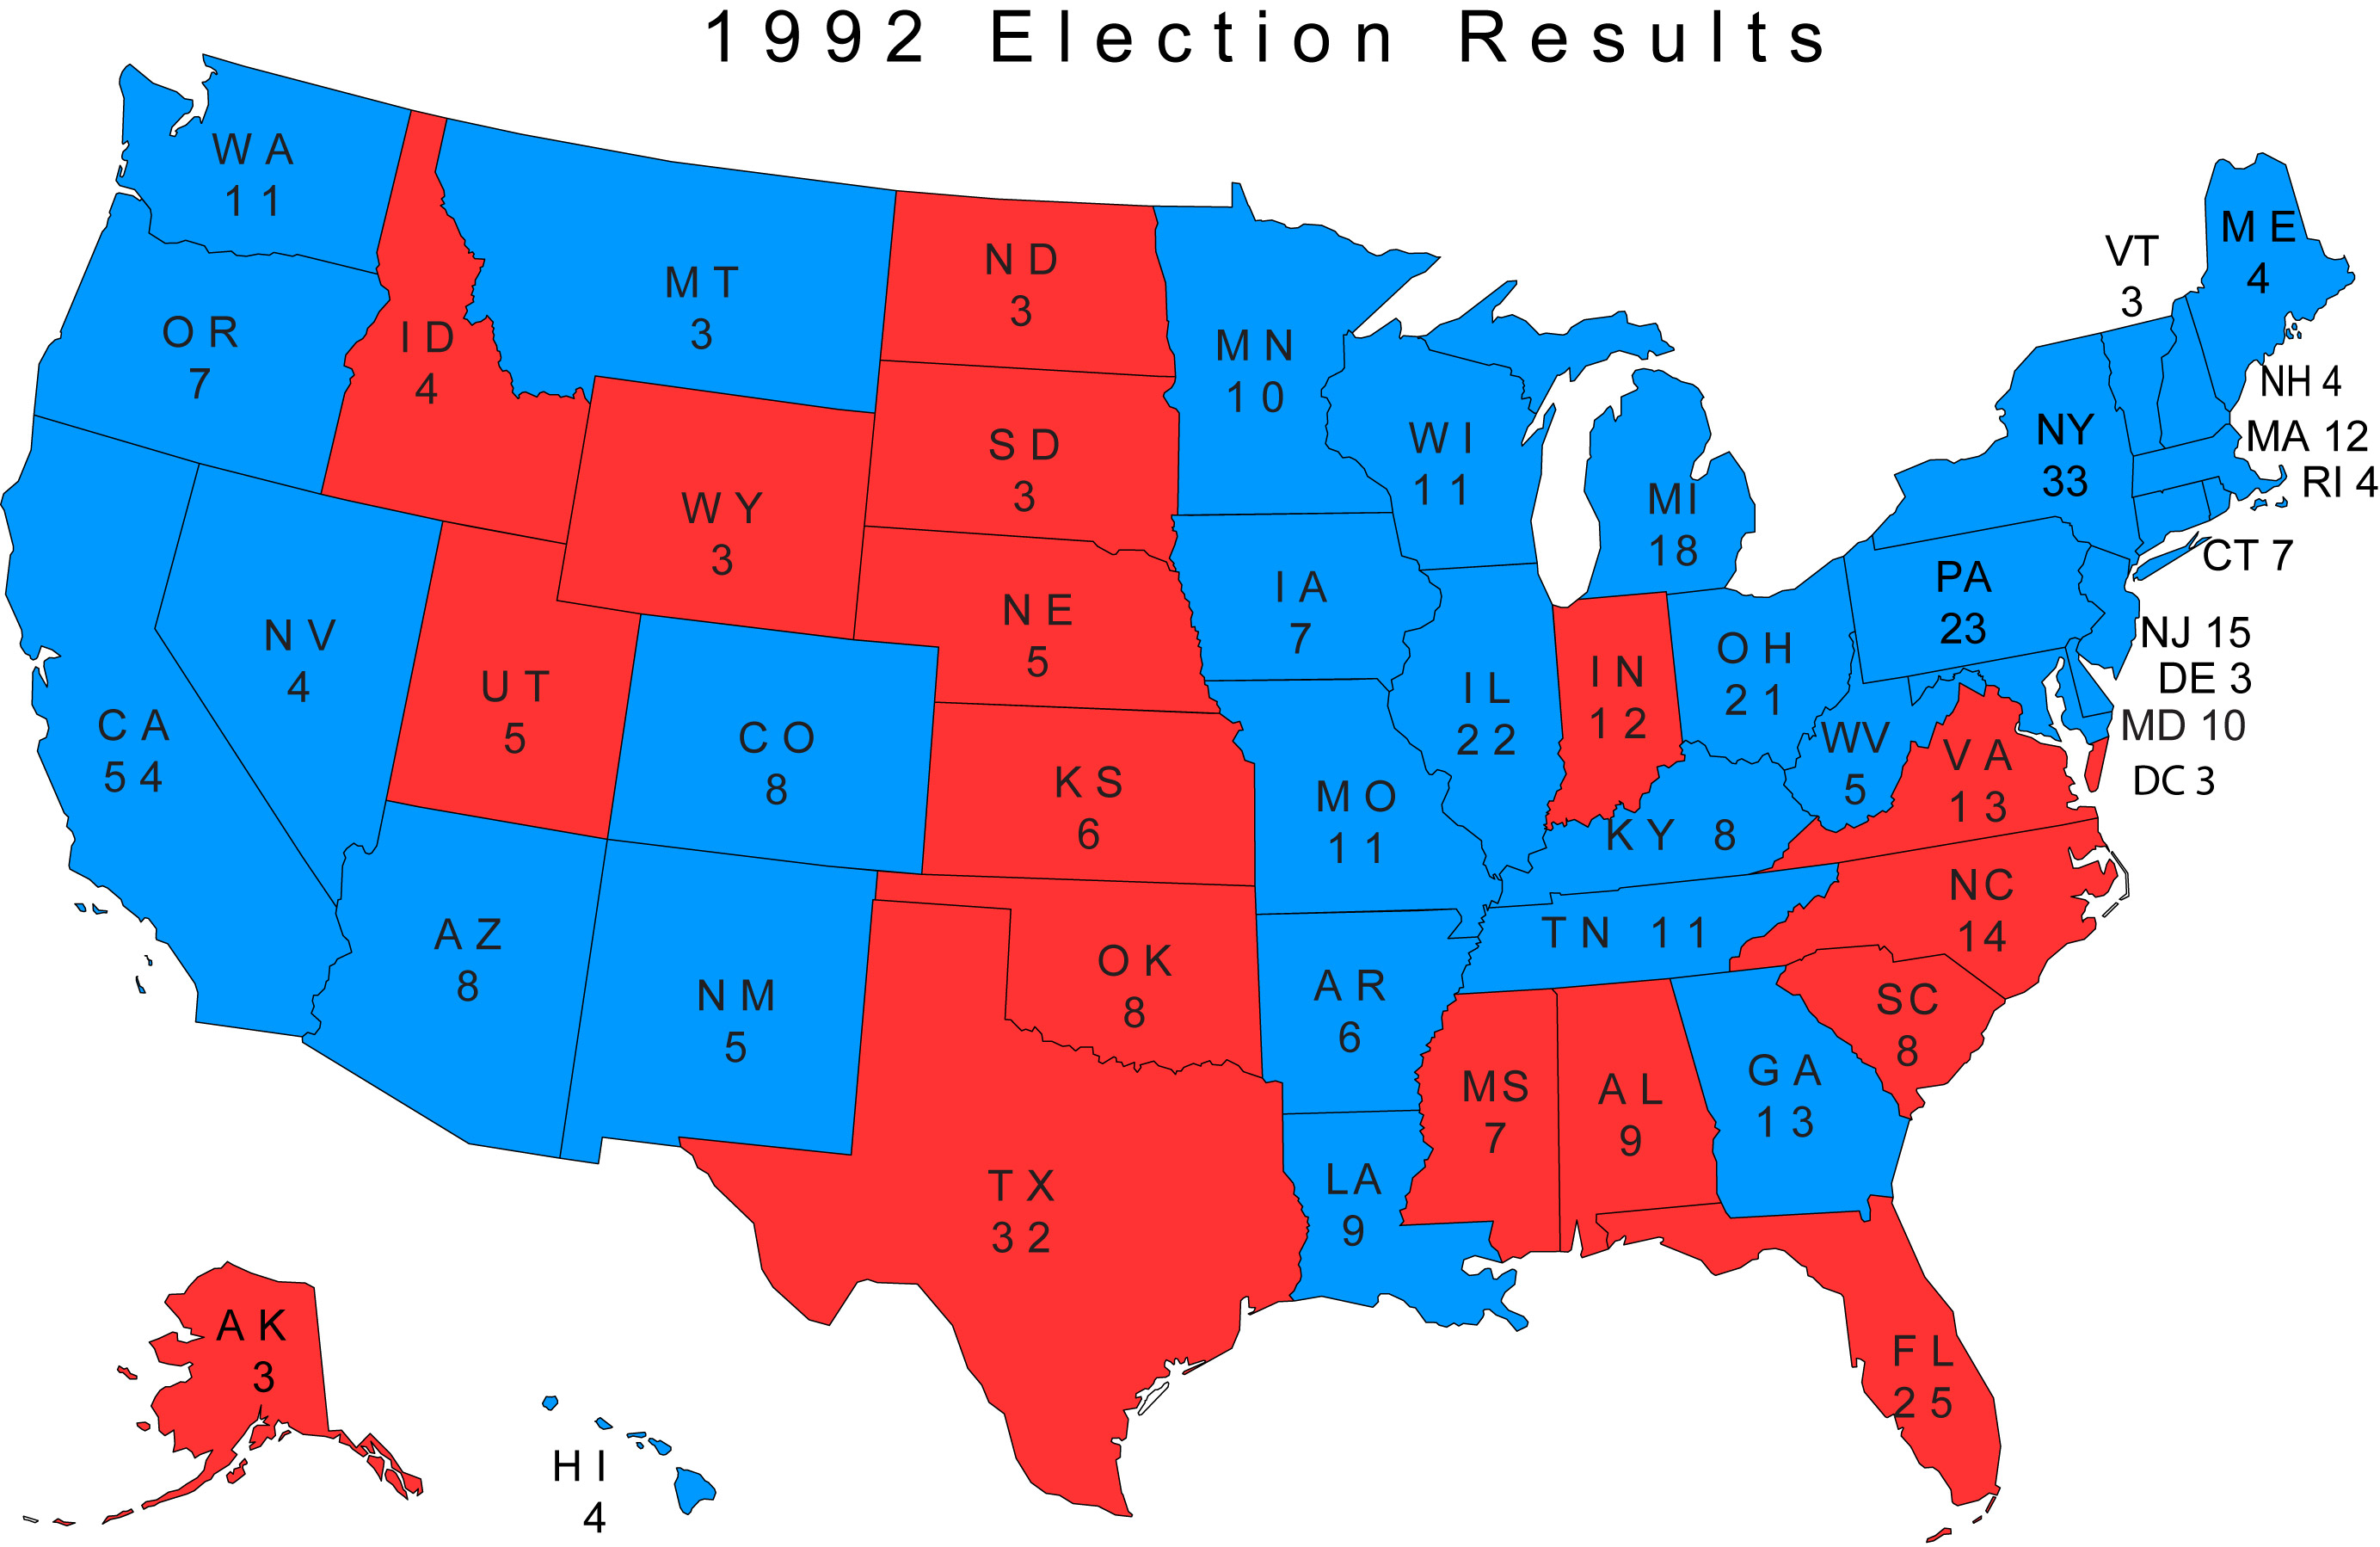 1992 Election results